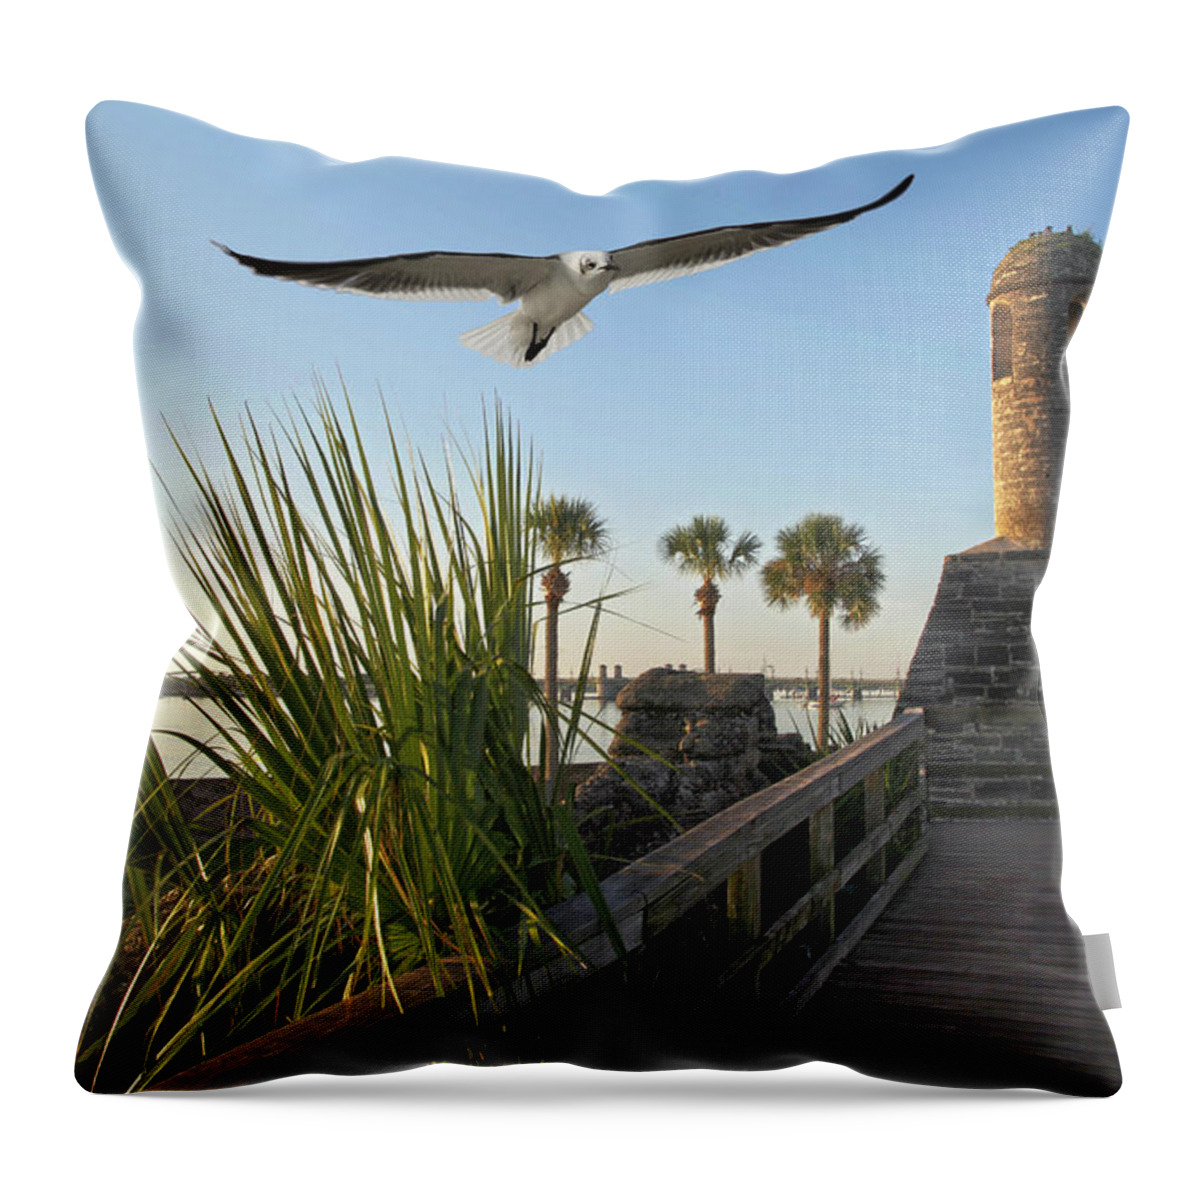 Spanish Throw Pillow featuring the photograph Walk To The Fort by Robert Och